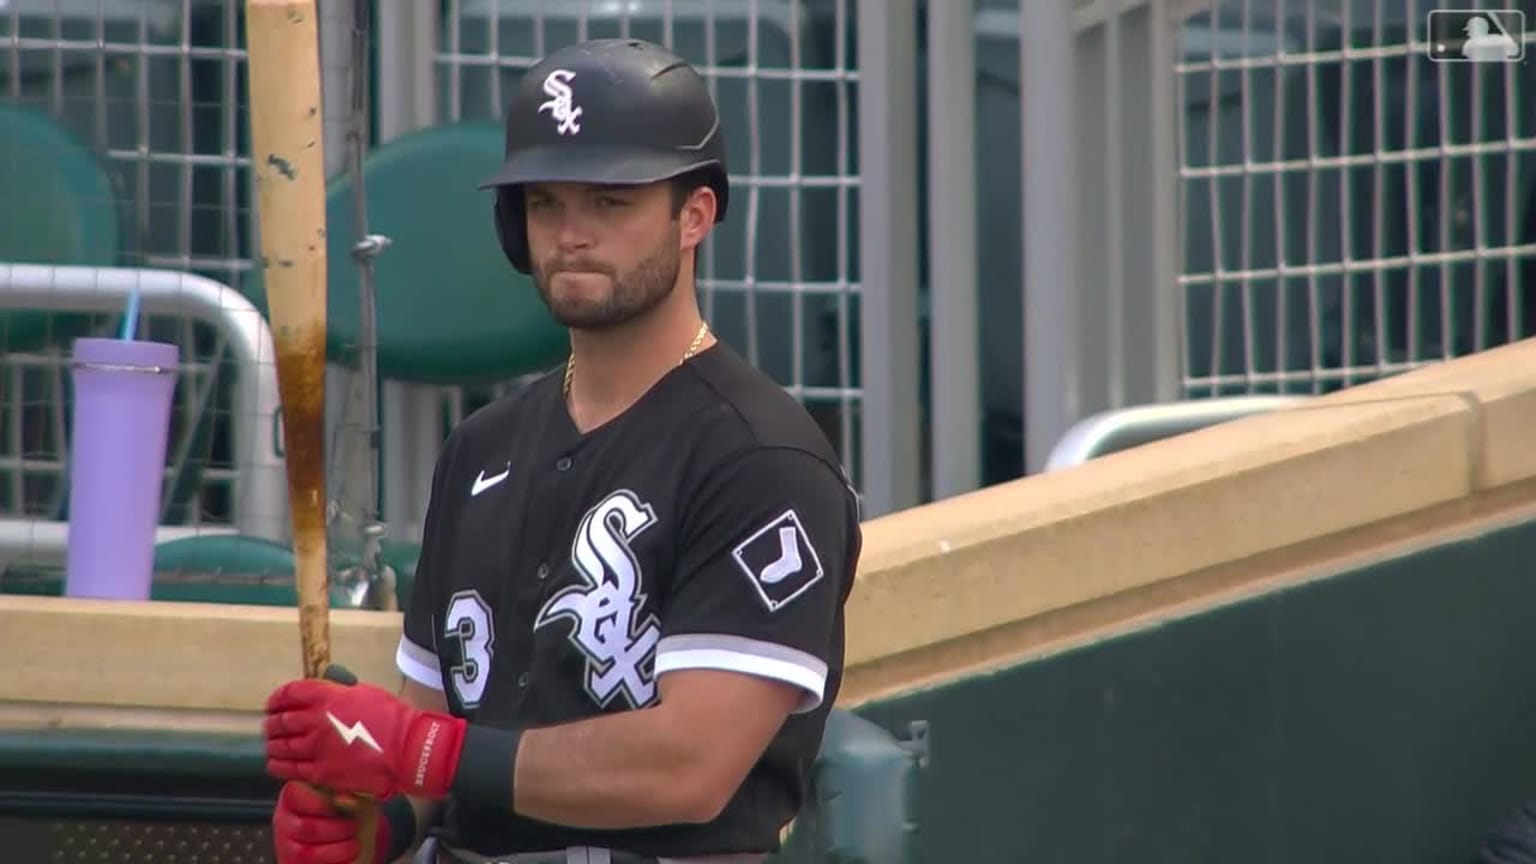 Andrew Benintendi Launches First Home Run in White Sox Uniform